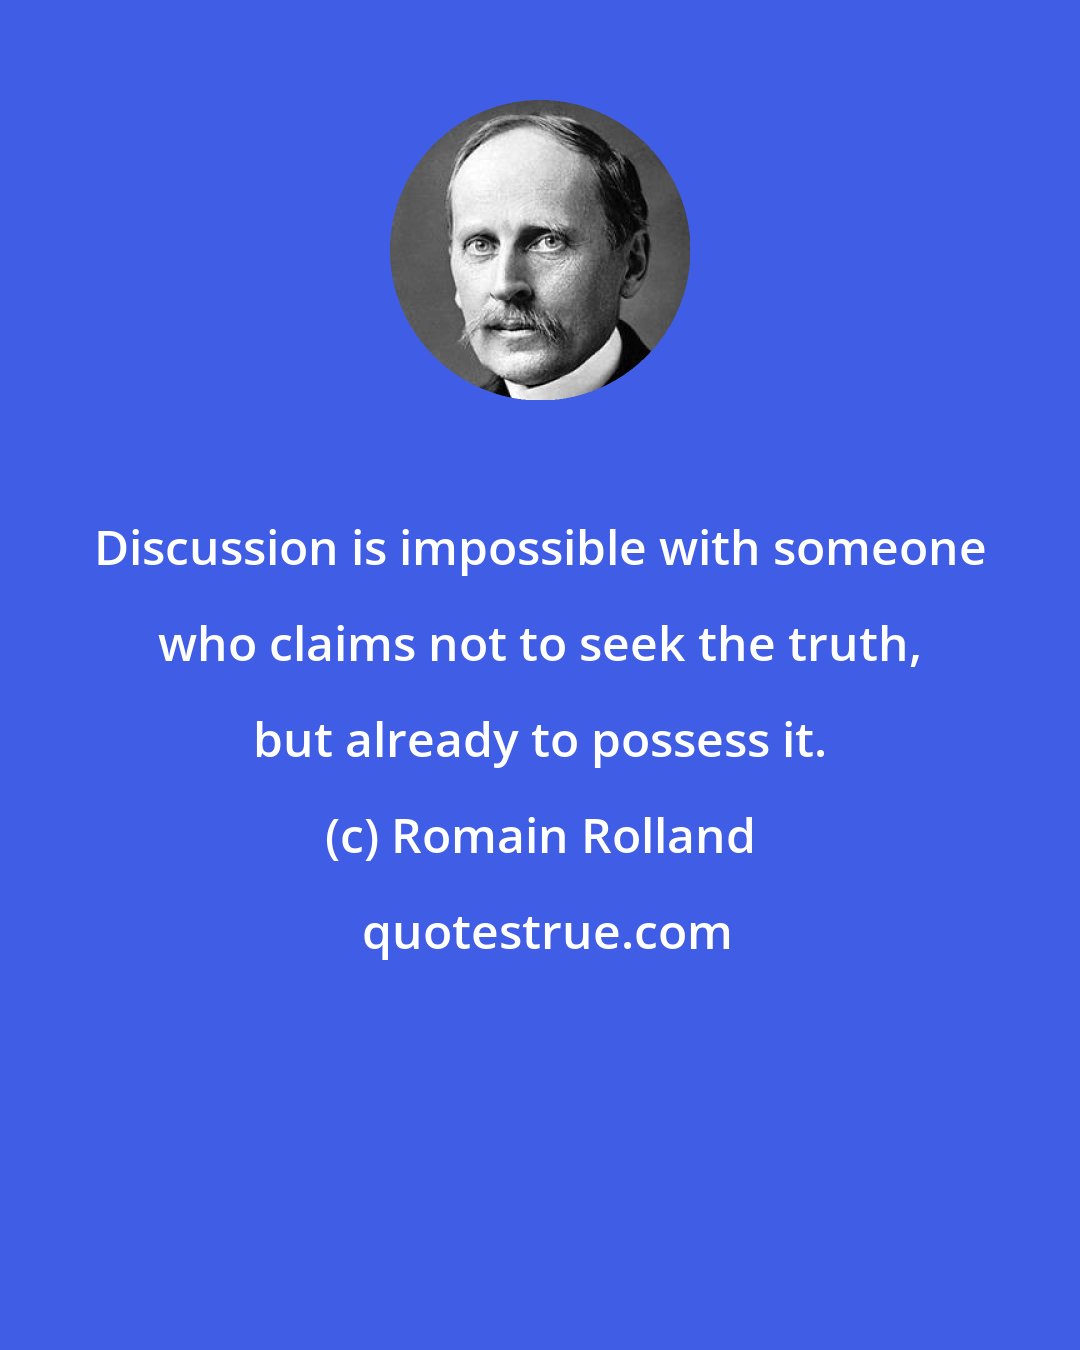 Romain Rolland: Discussion is impossible with someone who claims not to seek the truth, but already to possess it.